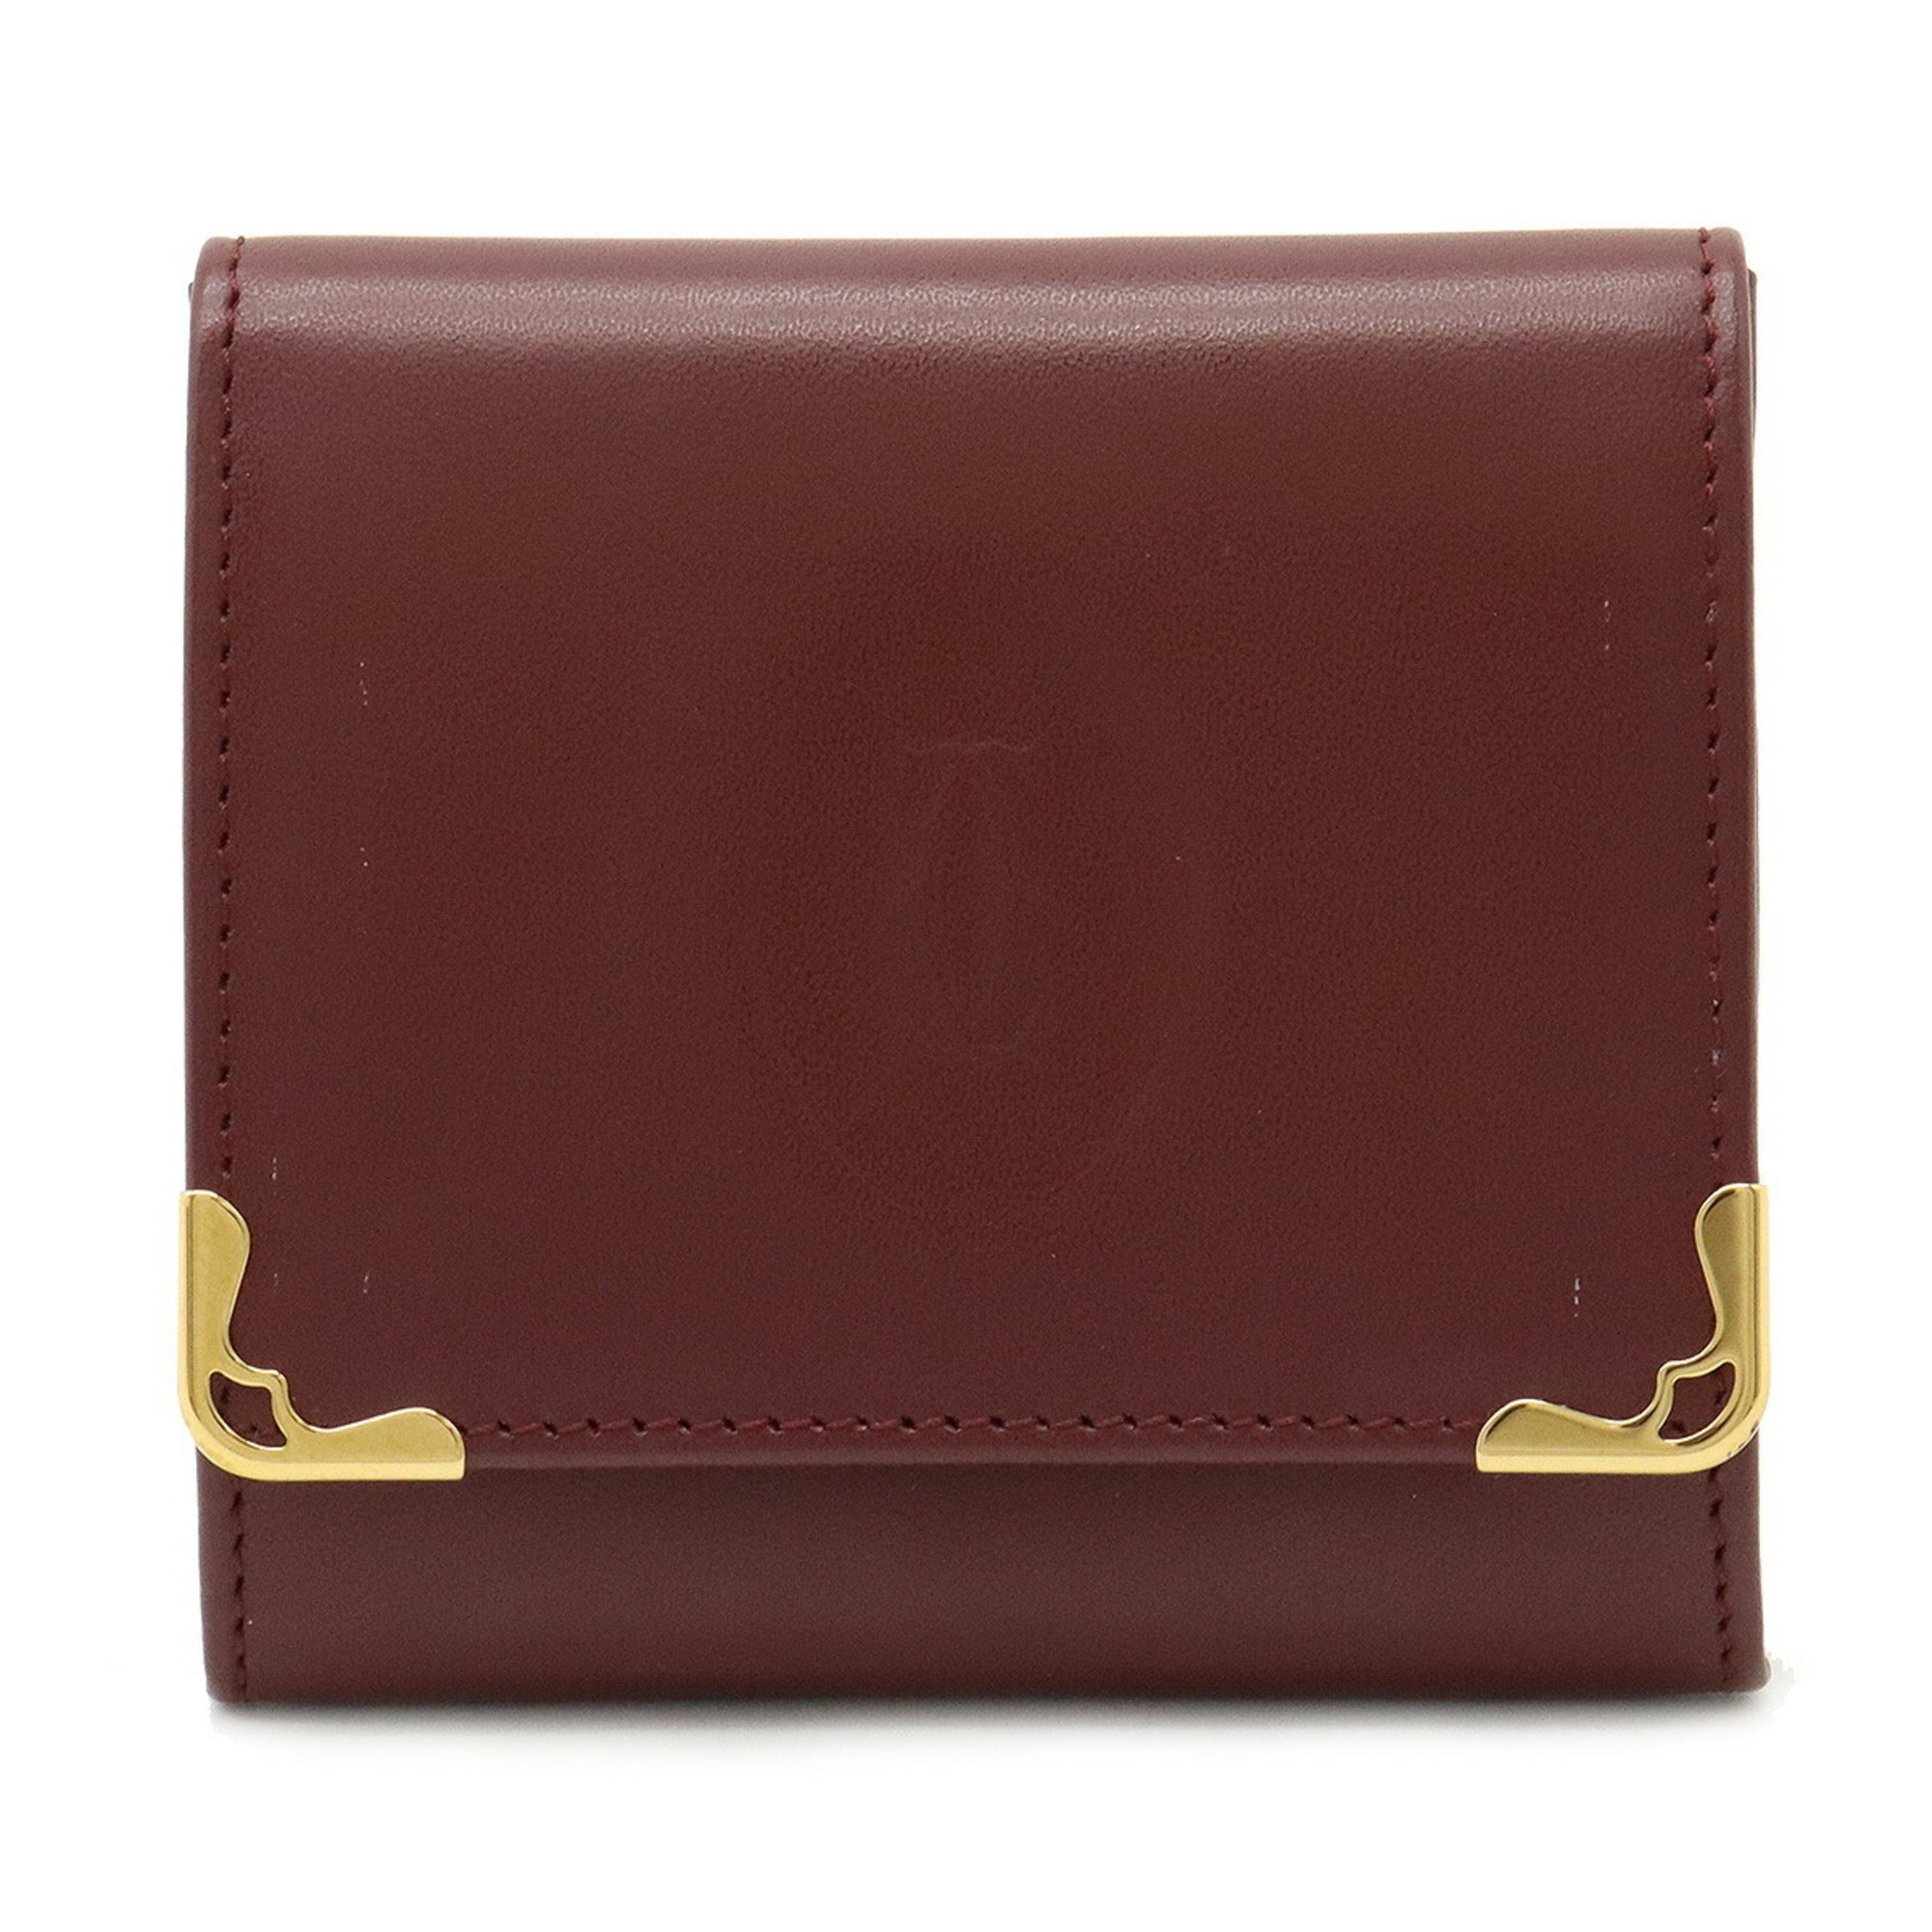 Buy [Used] Cartier Coin Case Mustline Coin Purse Leather Bordeaux L3000158  from Japan - Buy authentic Plus exclusive items from Japan | ZenPlus